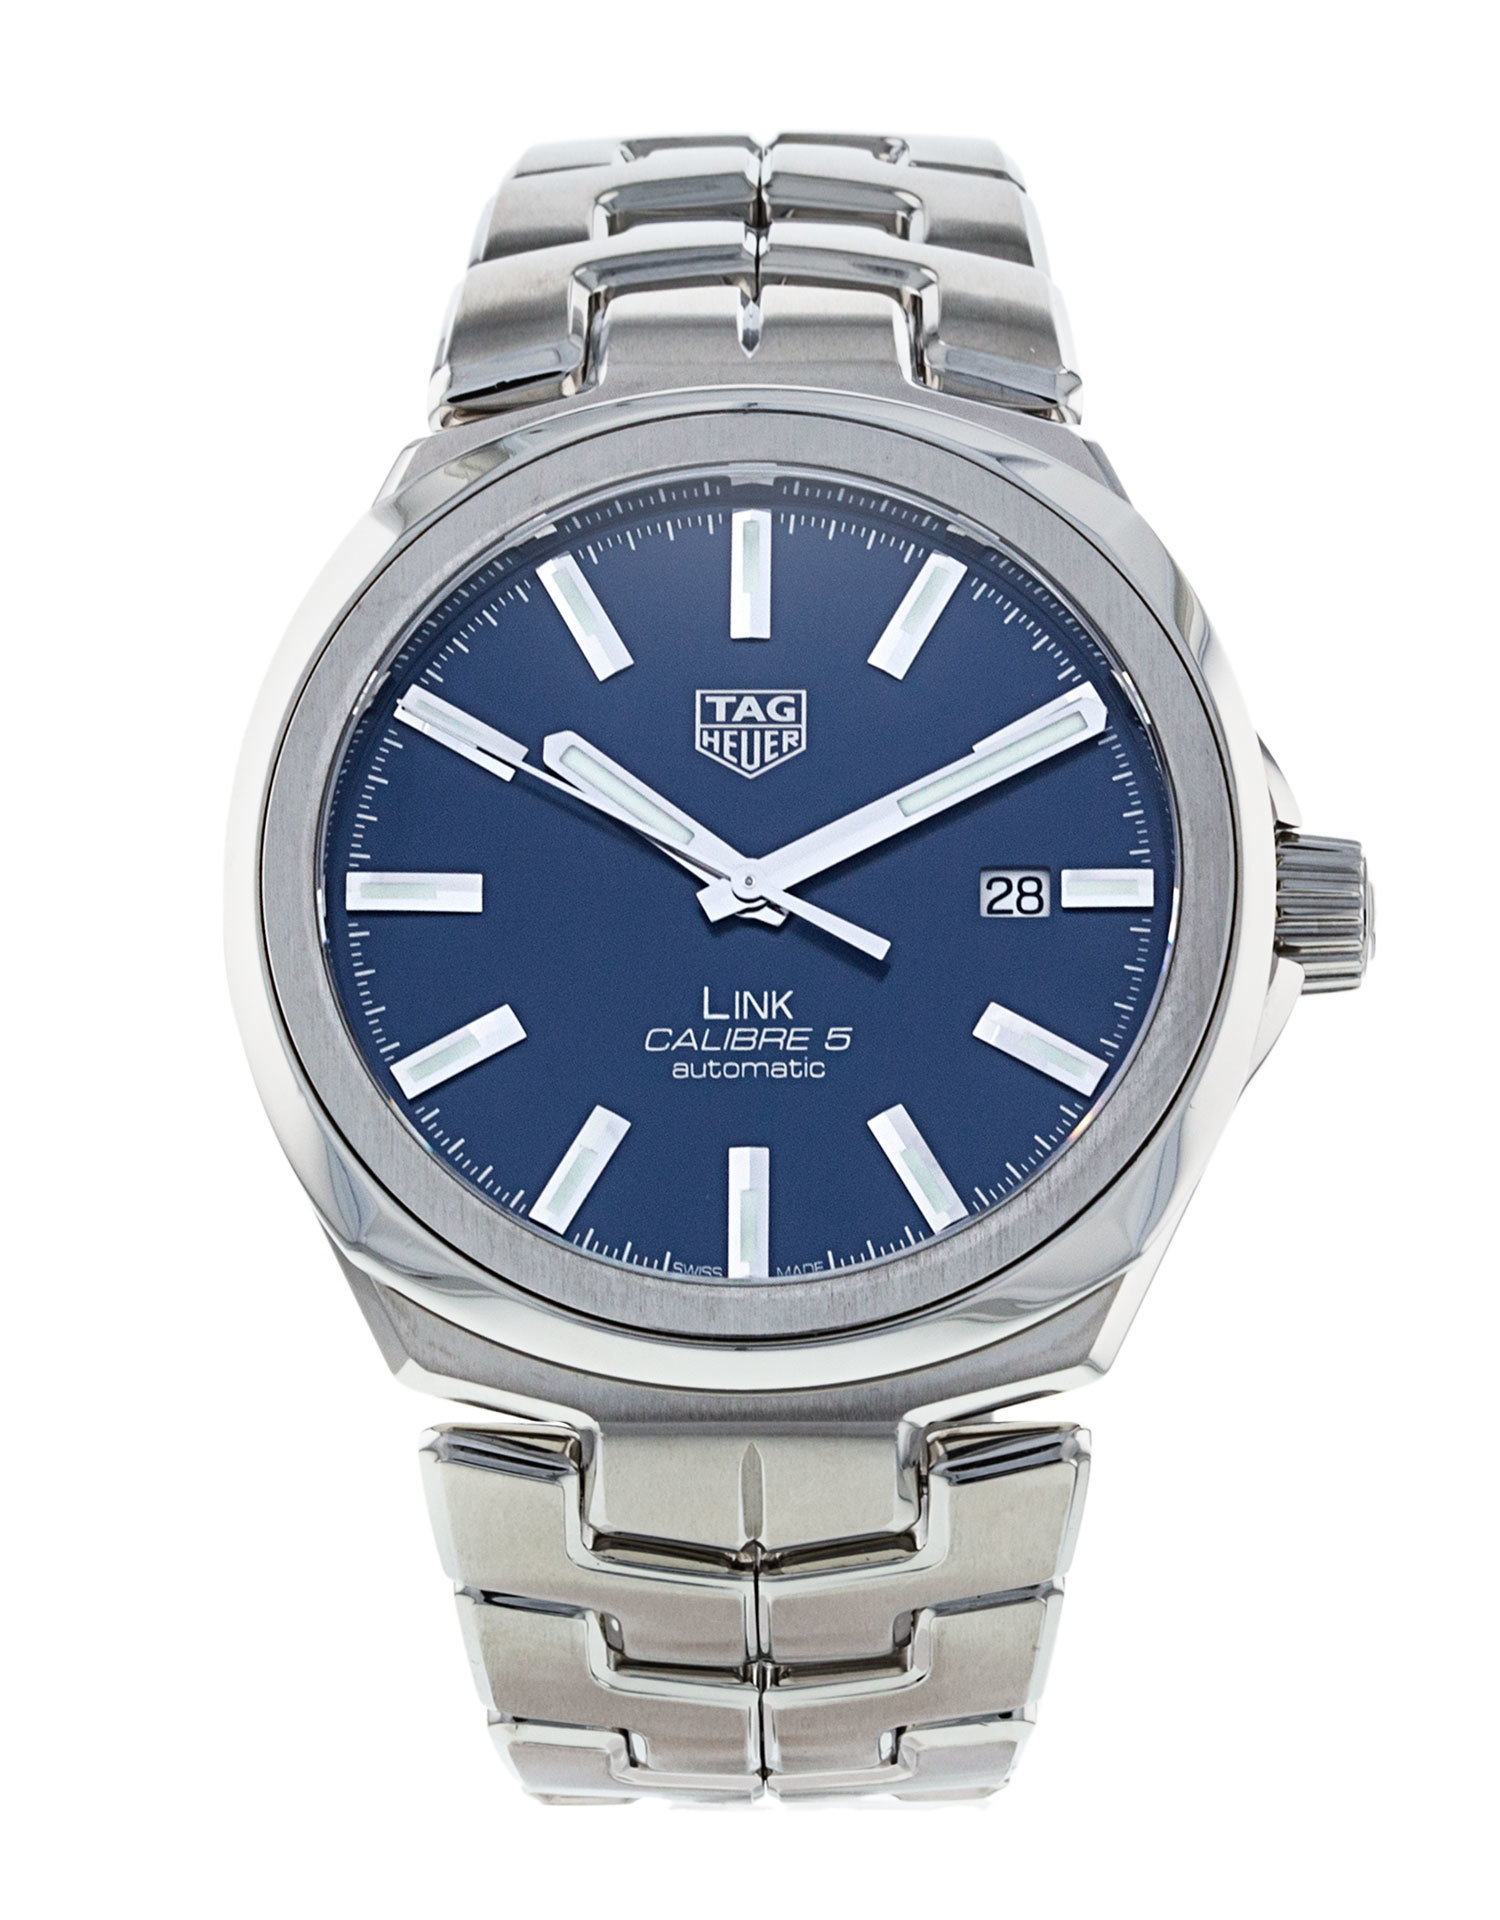 Tag Heuer: Stainless Steel Automatic Watch
Name: Link Calibre 5 
Finish: Satin And Polish
Dial Color: Blue
Bezel: Smooth
Mm: 41Mm